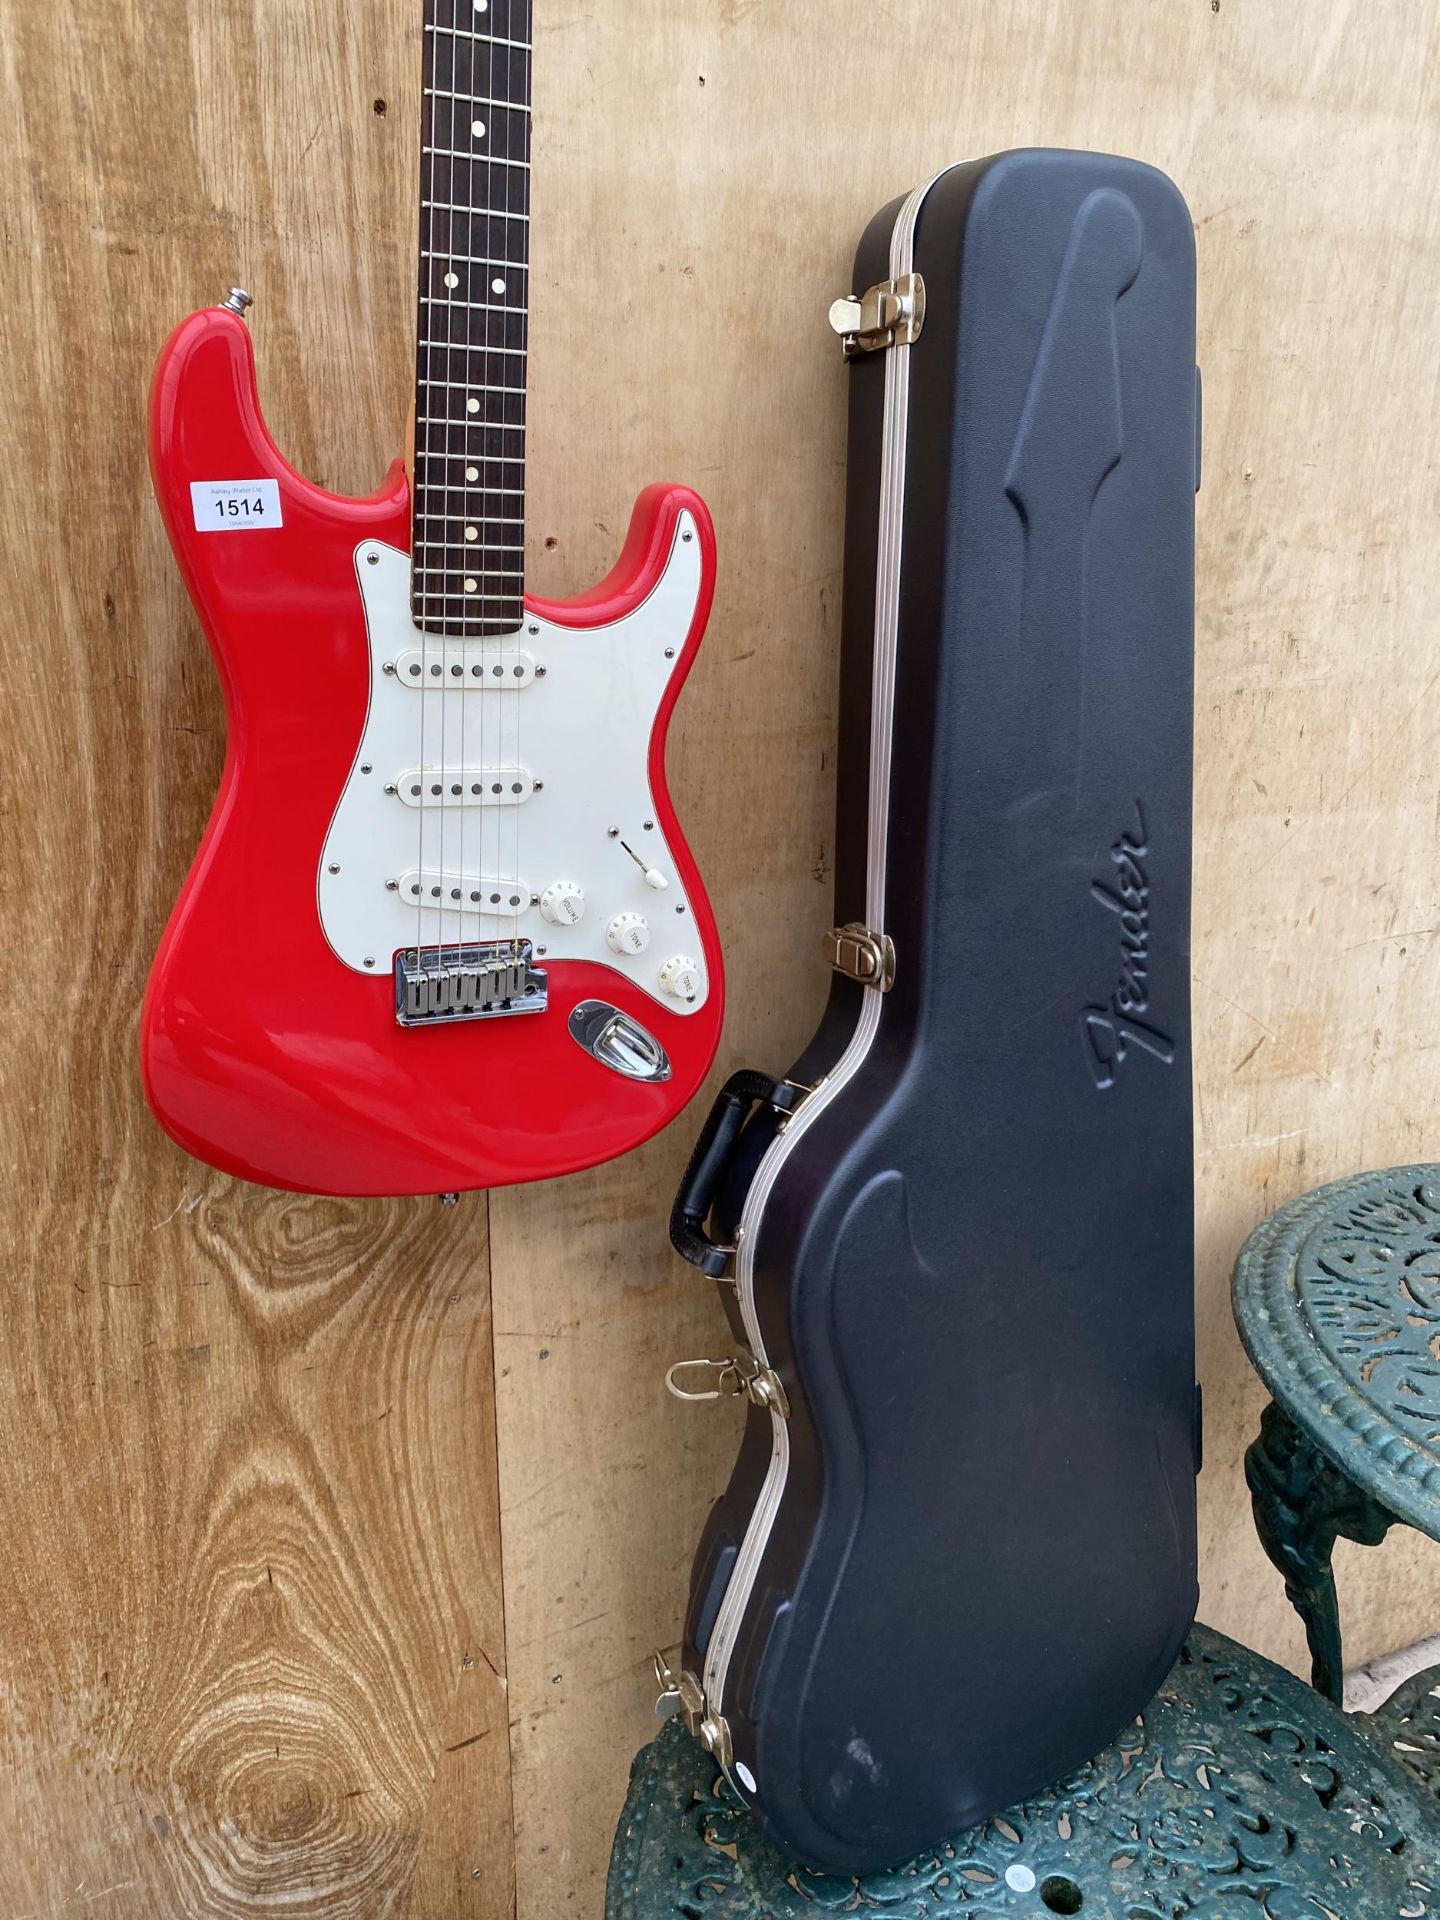 A RED FENDER STRATOCASTER ELECTRIC GUITAR WITH FENDER CARRY CASE ( SERIAL NUMBER: Z0132916) - Image 6 of 10